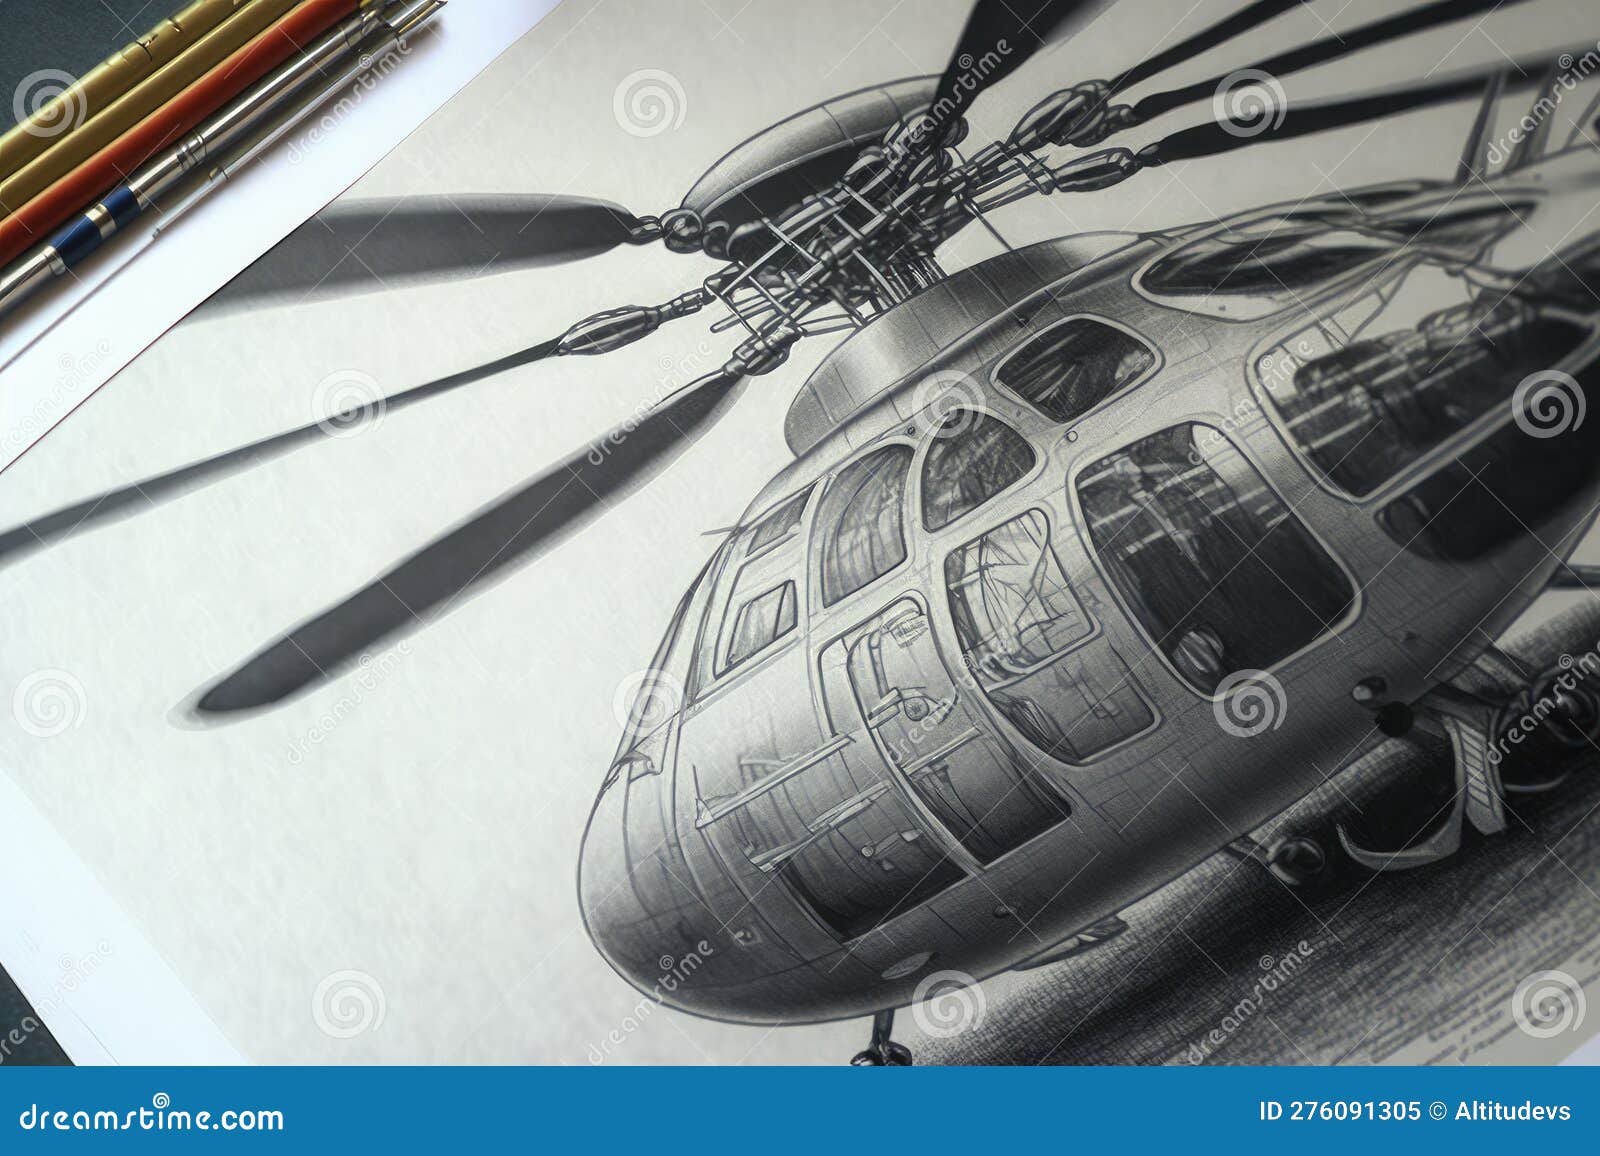 Apache on the Hunt Drawing by Chris Dang - Pixels